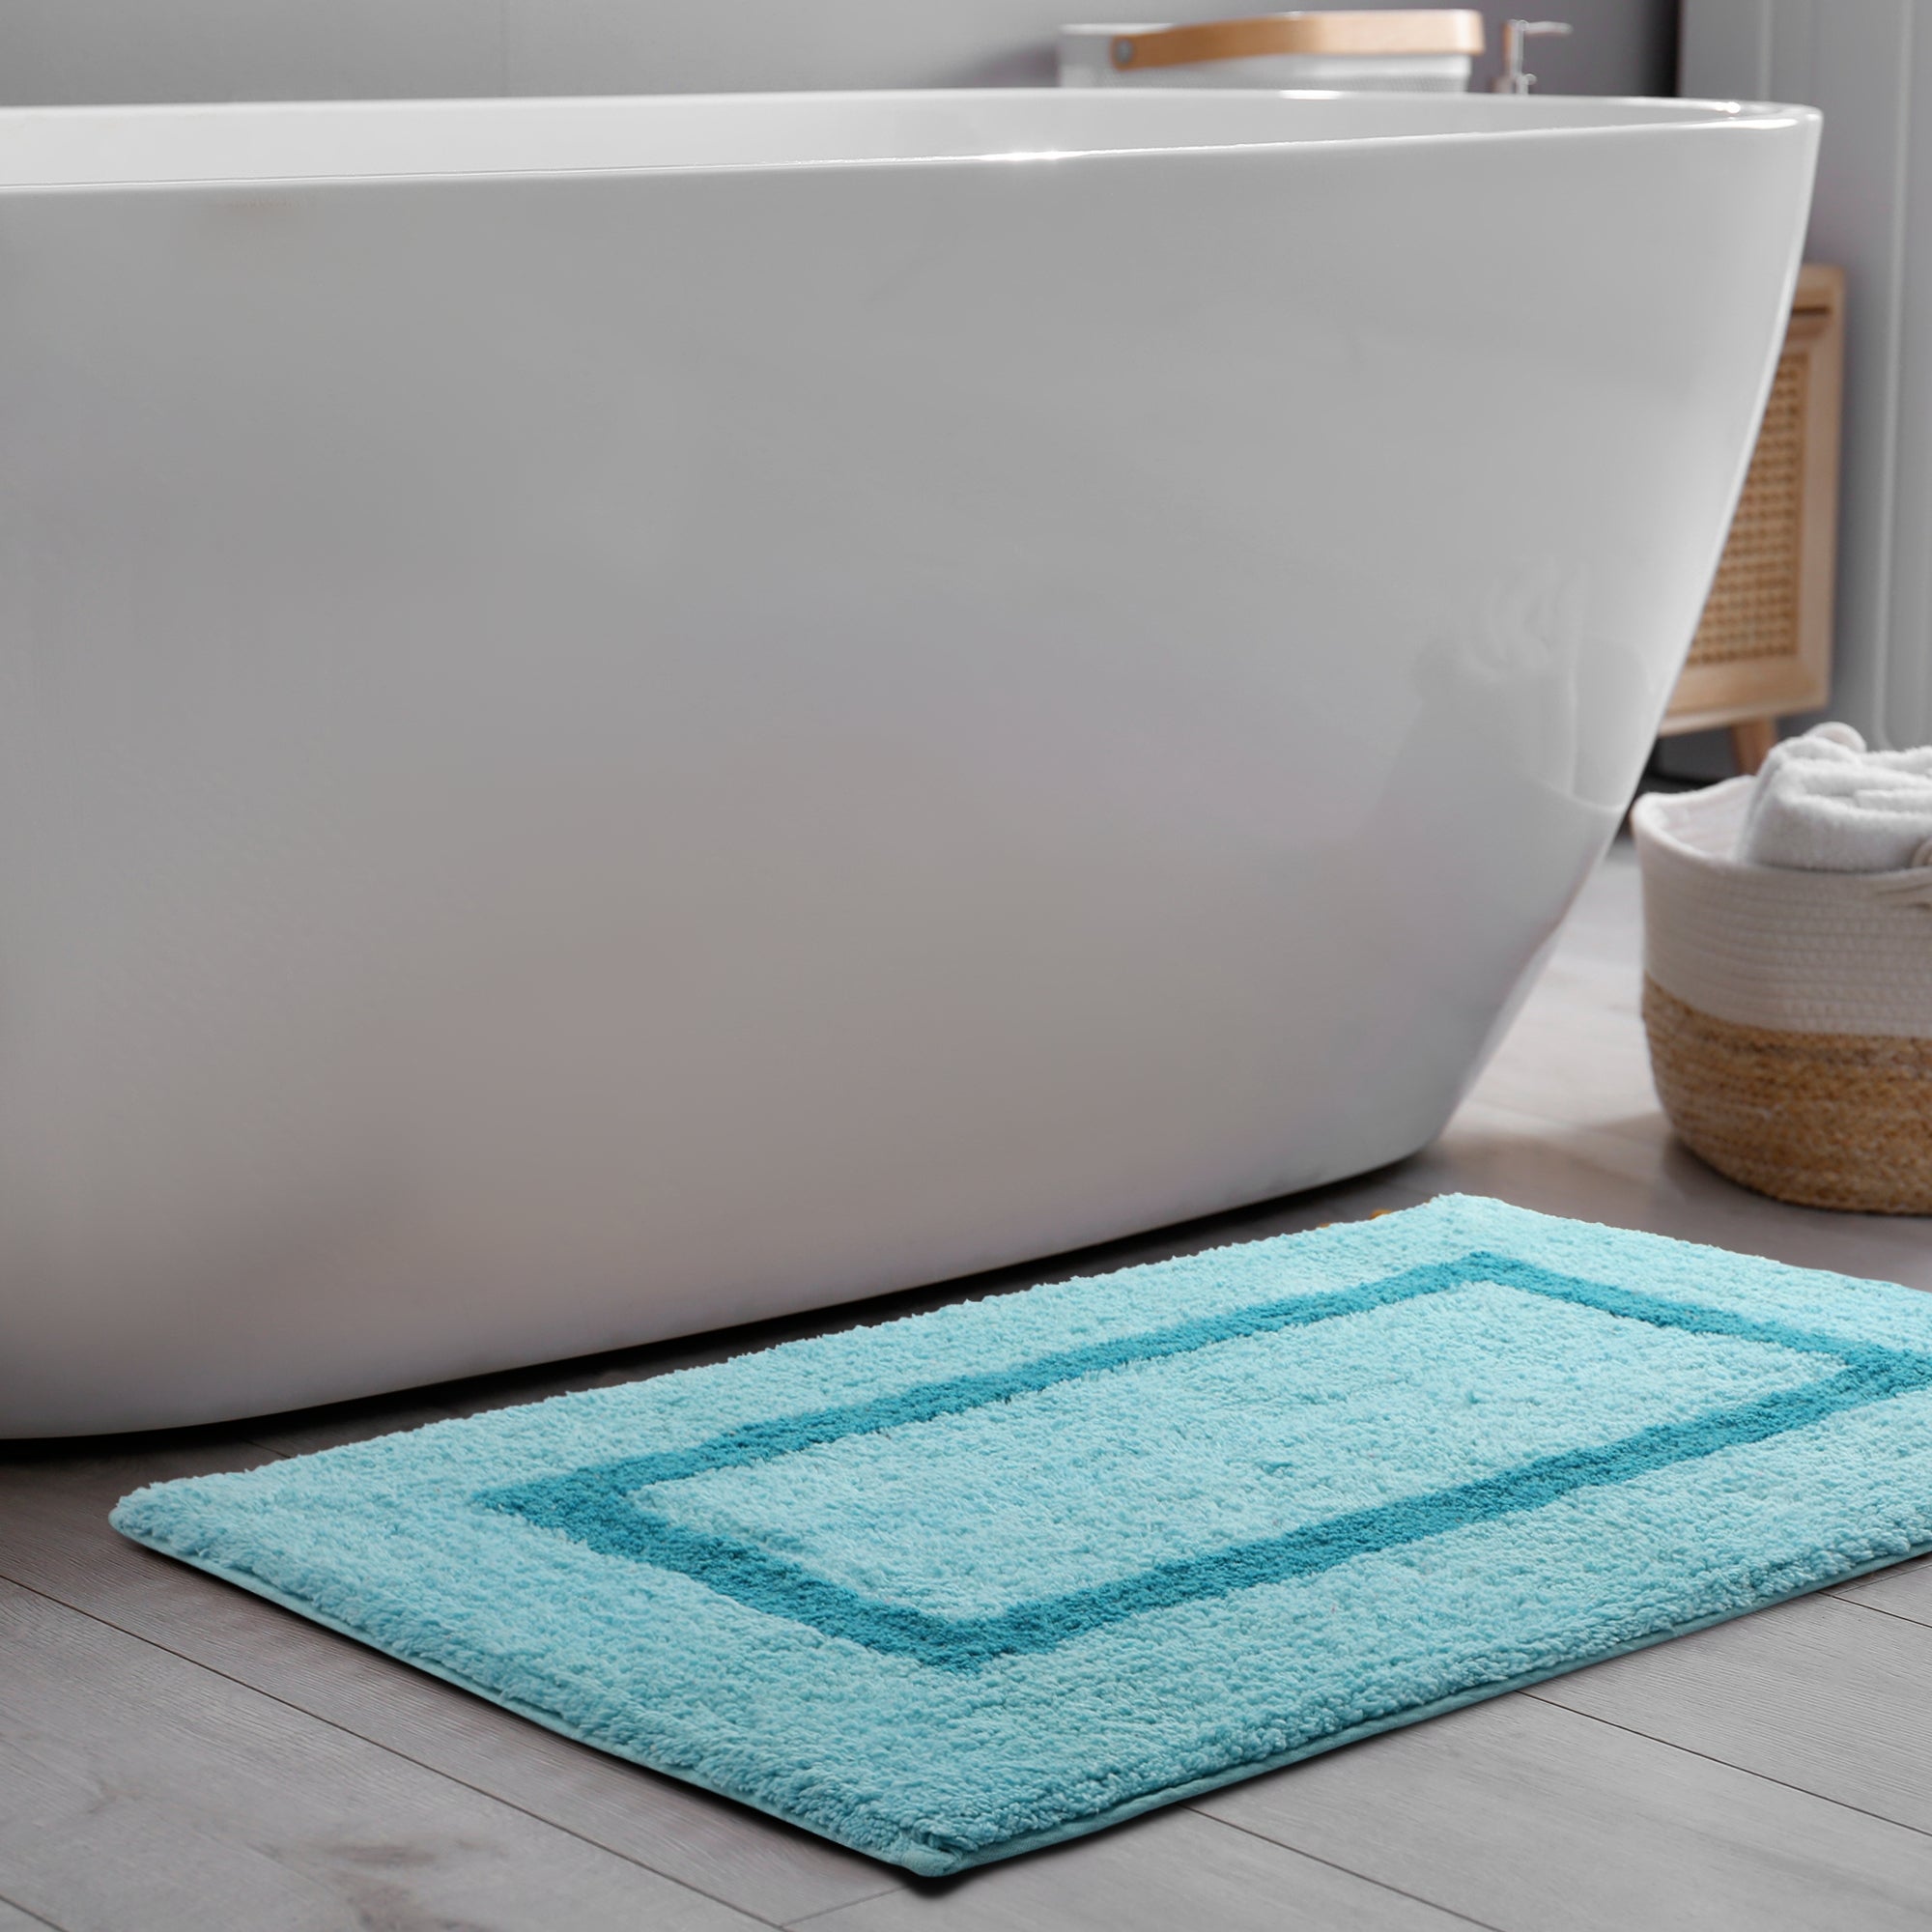 Deluxe Cotton Quick Drying Bath Mat with Anti-Skid Latex